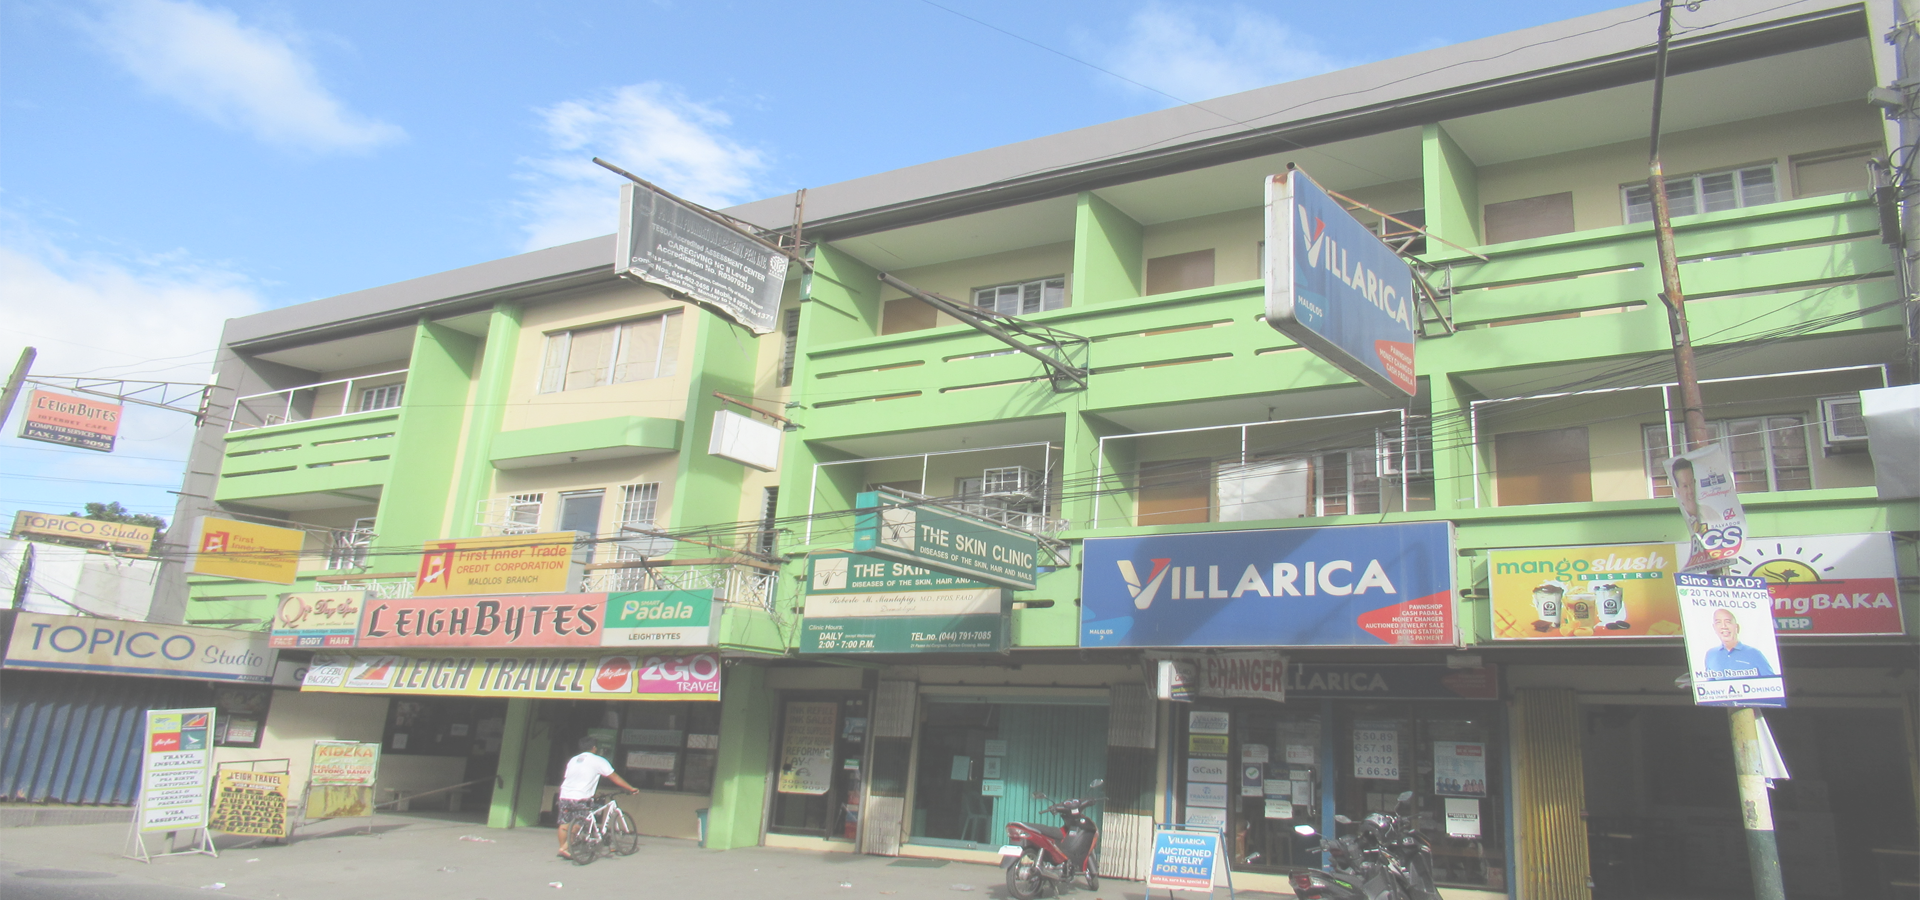 <b>Malolos, The Province of Bulacan, Central Luzon Region, Philippines</b>